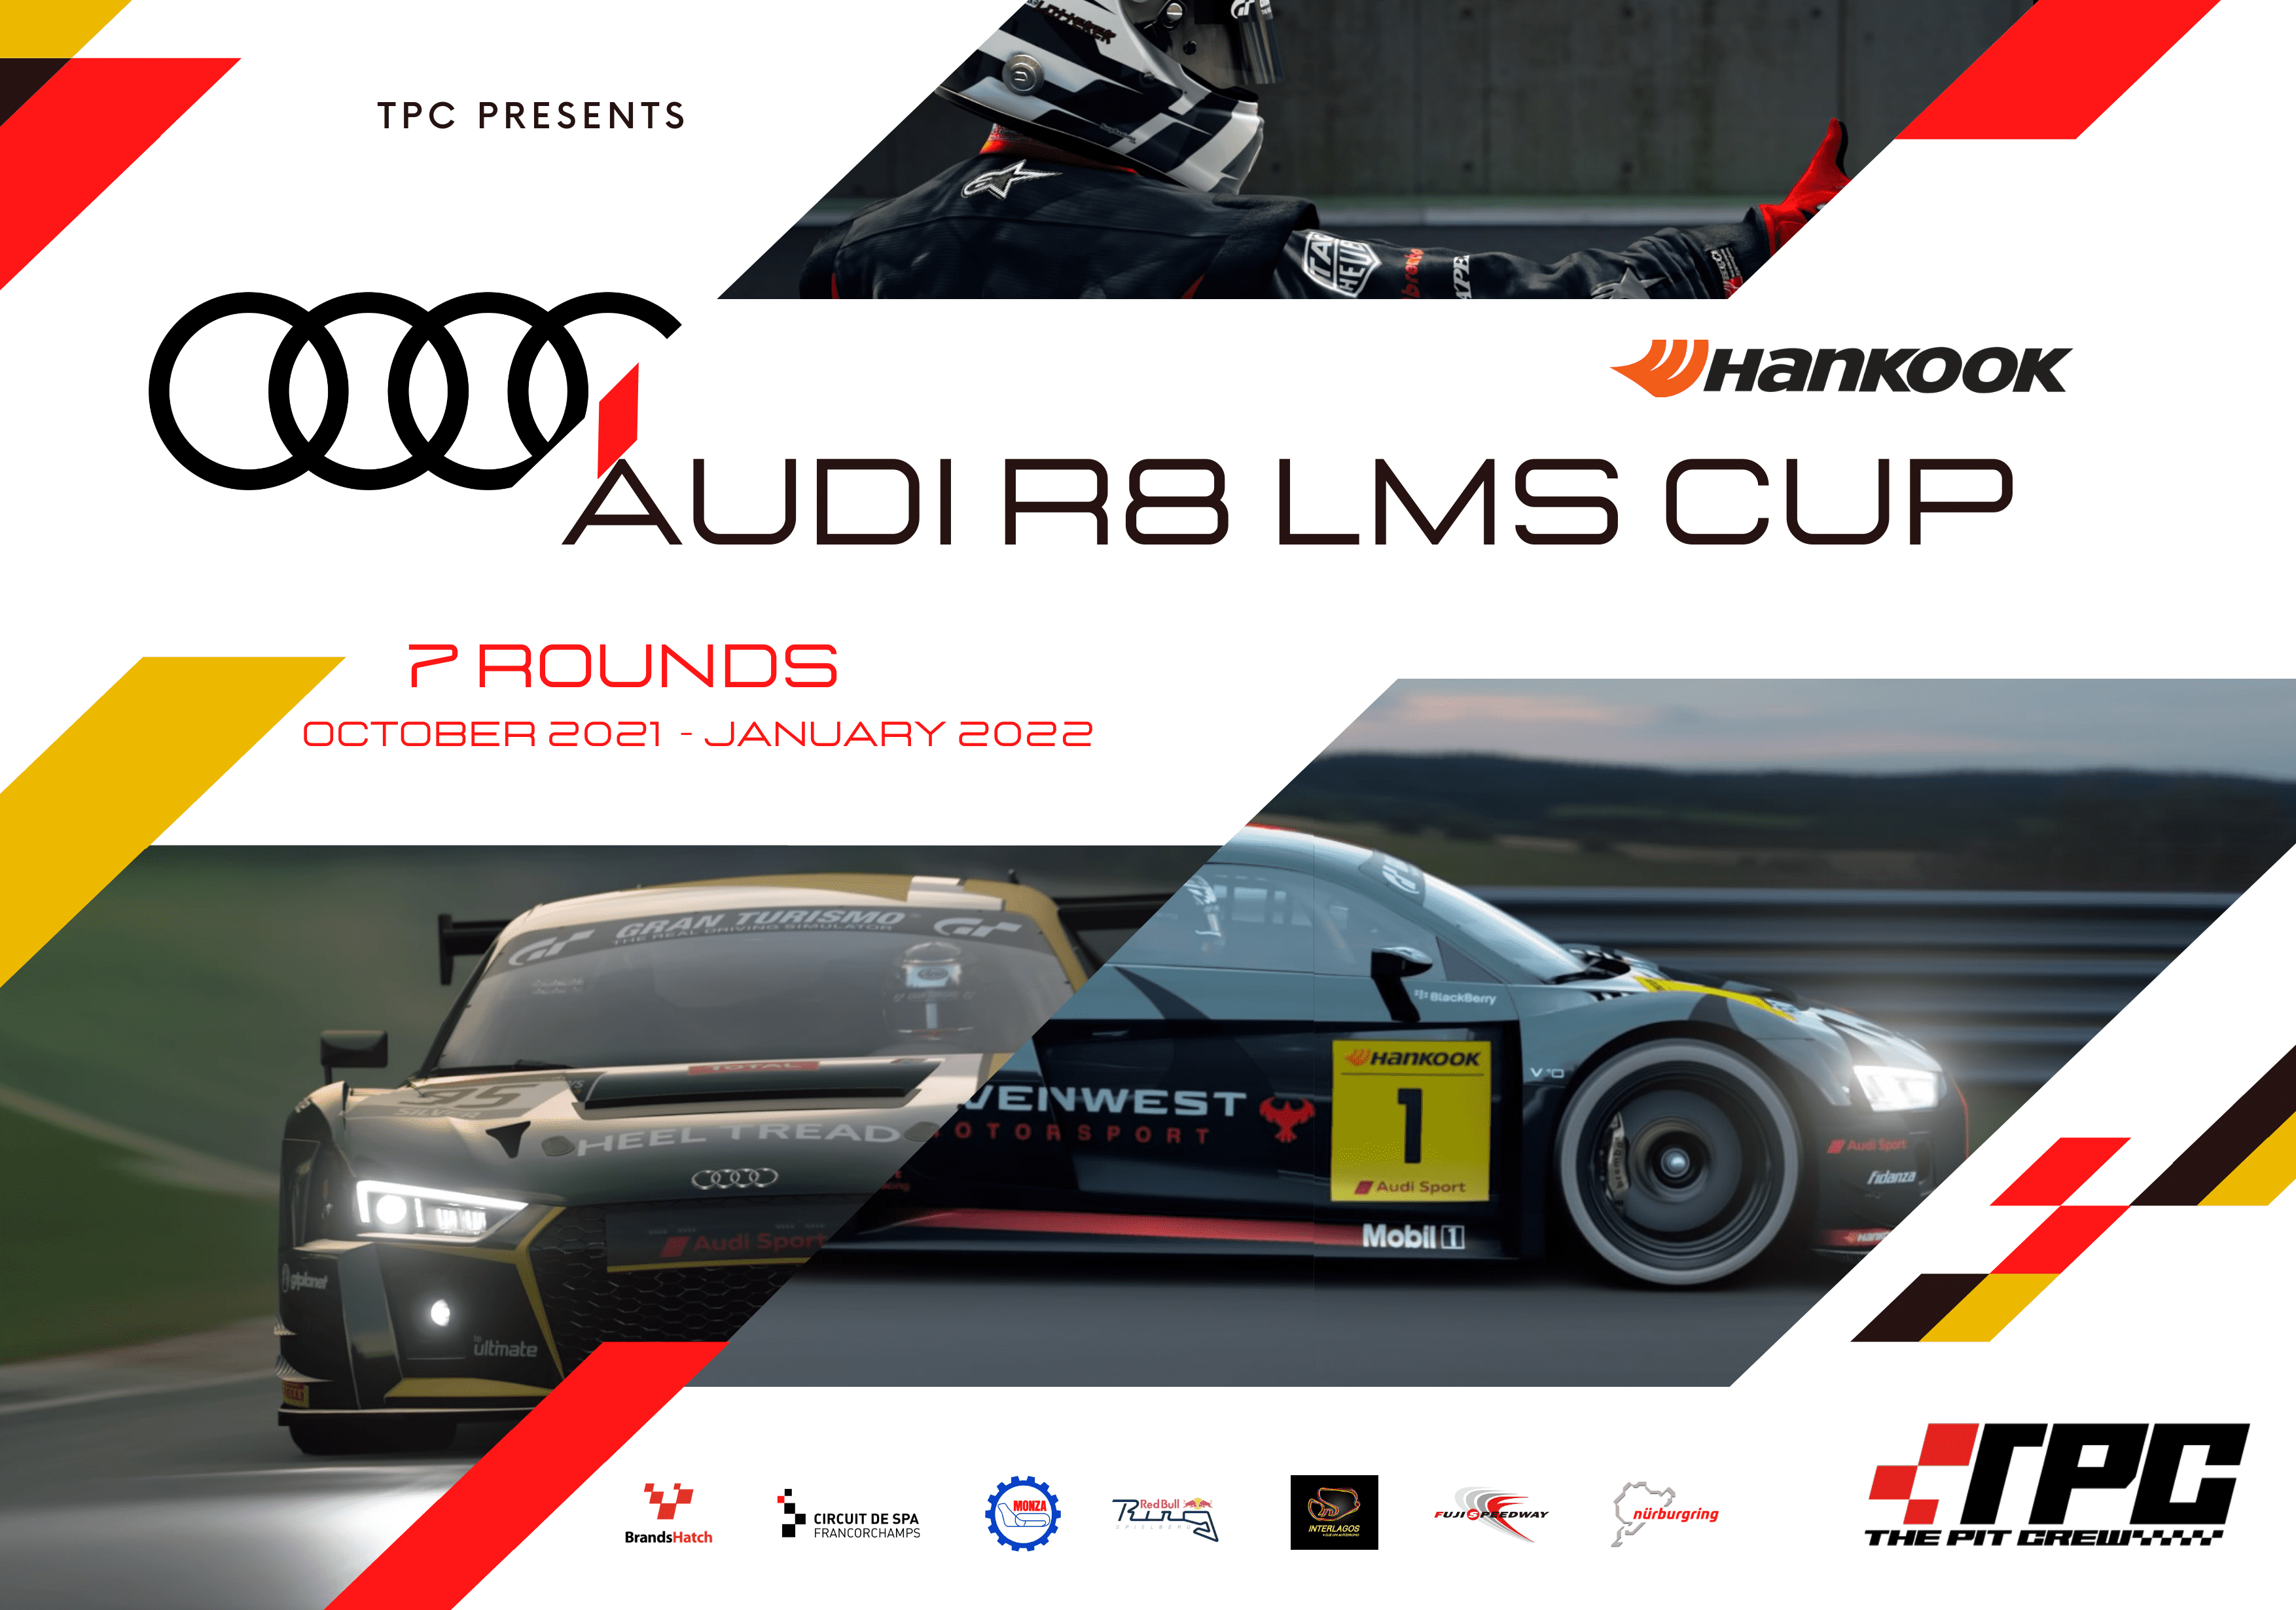 AUDI_R8_LMS_CUP_POSTER.png